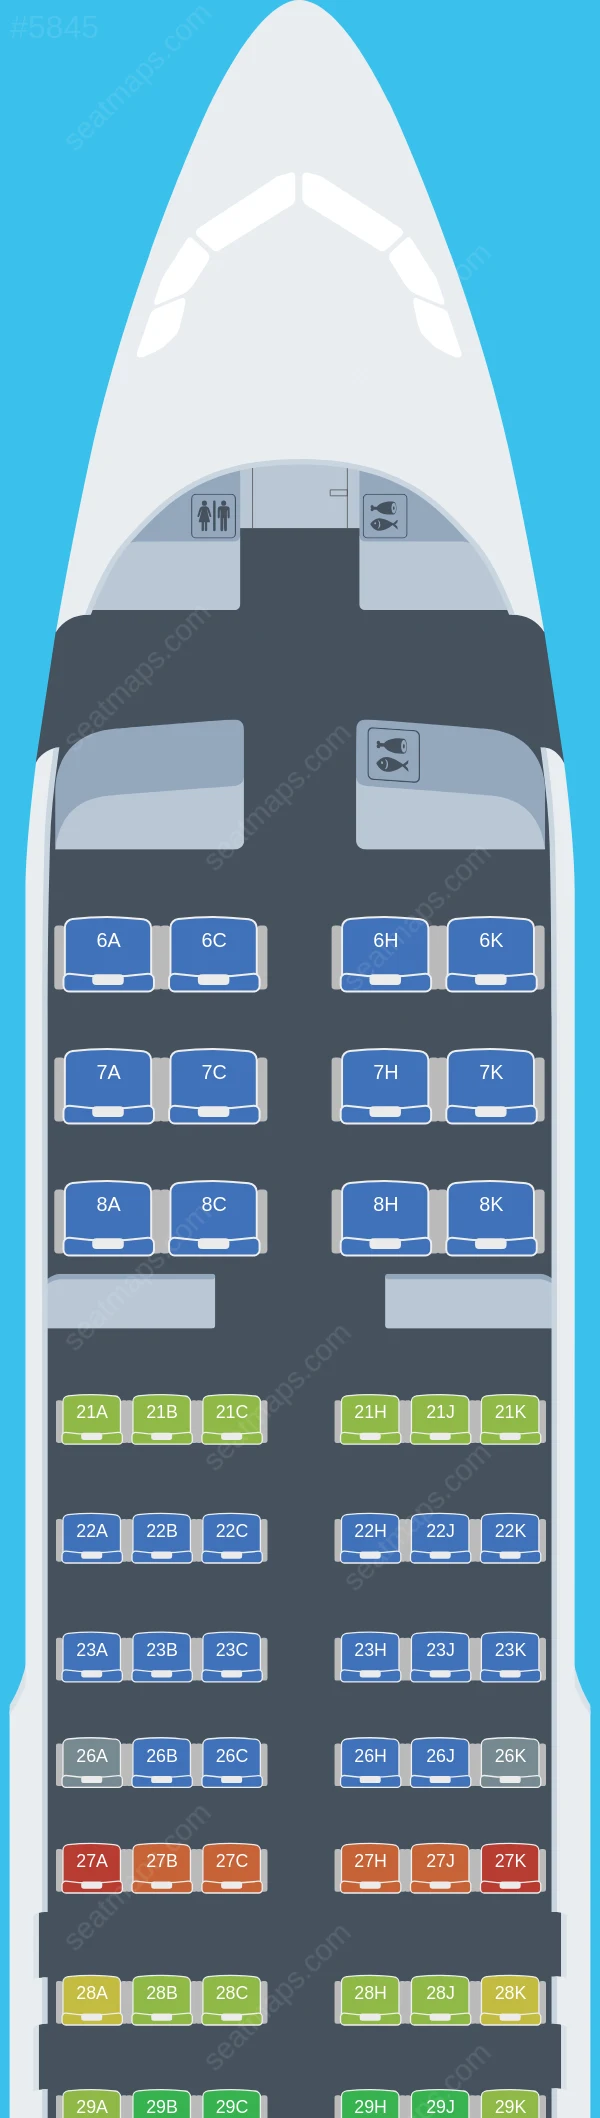 Royal Brunei Airlines Airbus A320neo seatmap preview